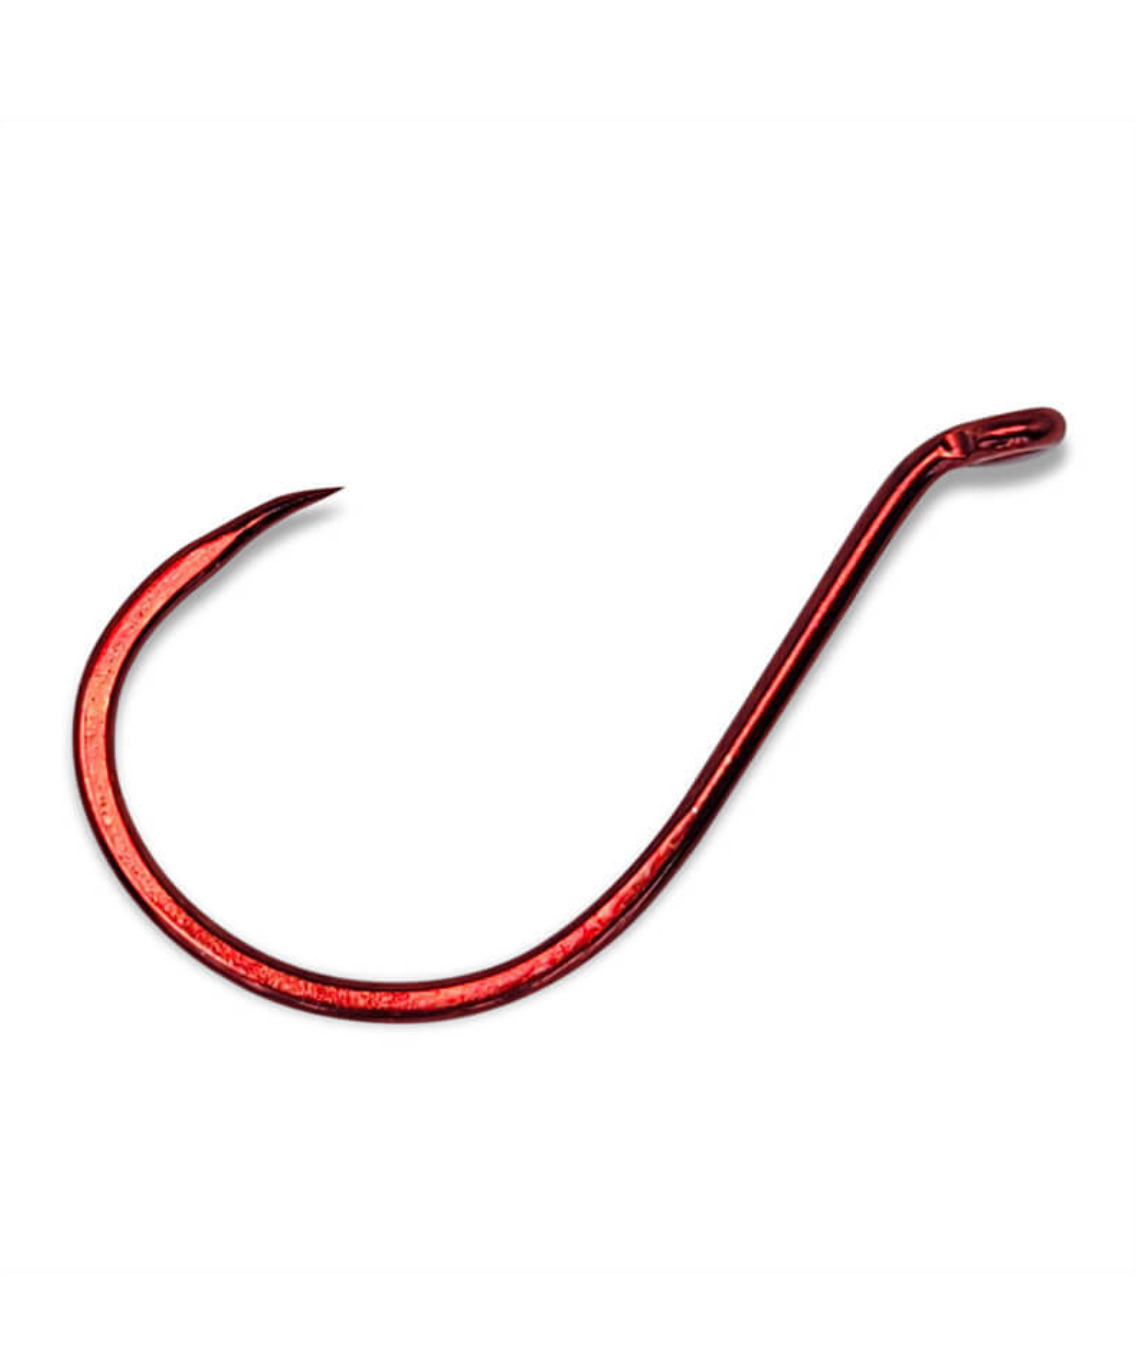 Gamakatsu Octopus Barbless Hooks - 6 Pack - Red - Size 1/0